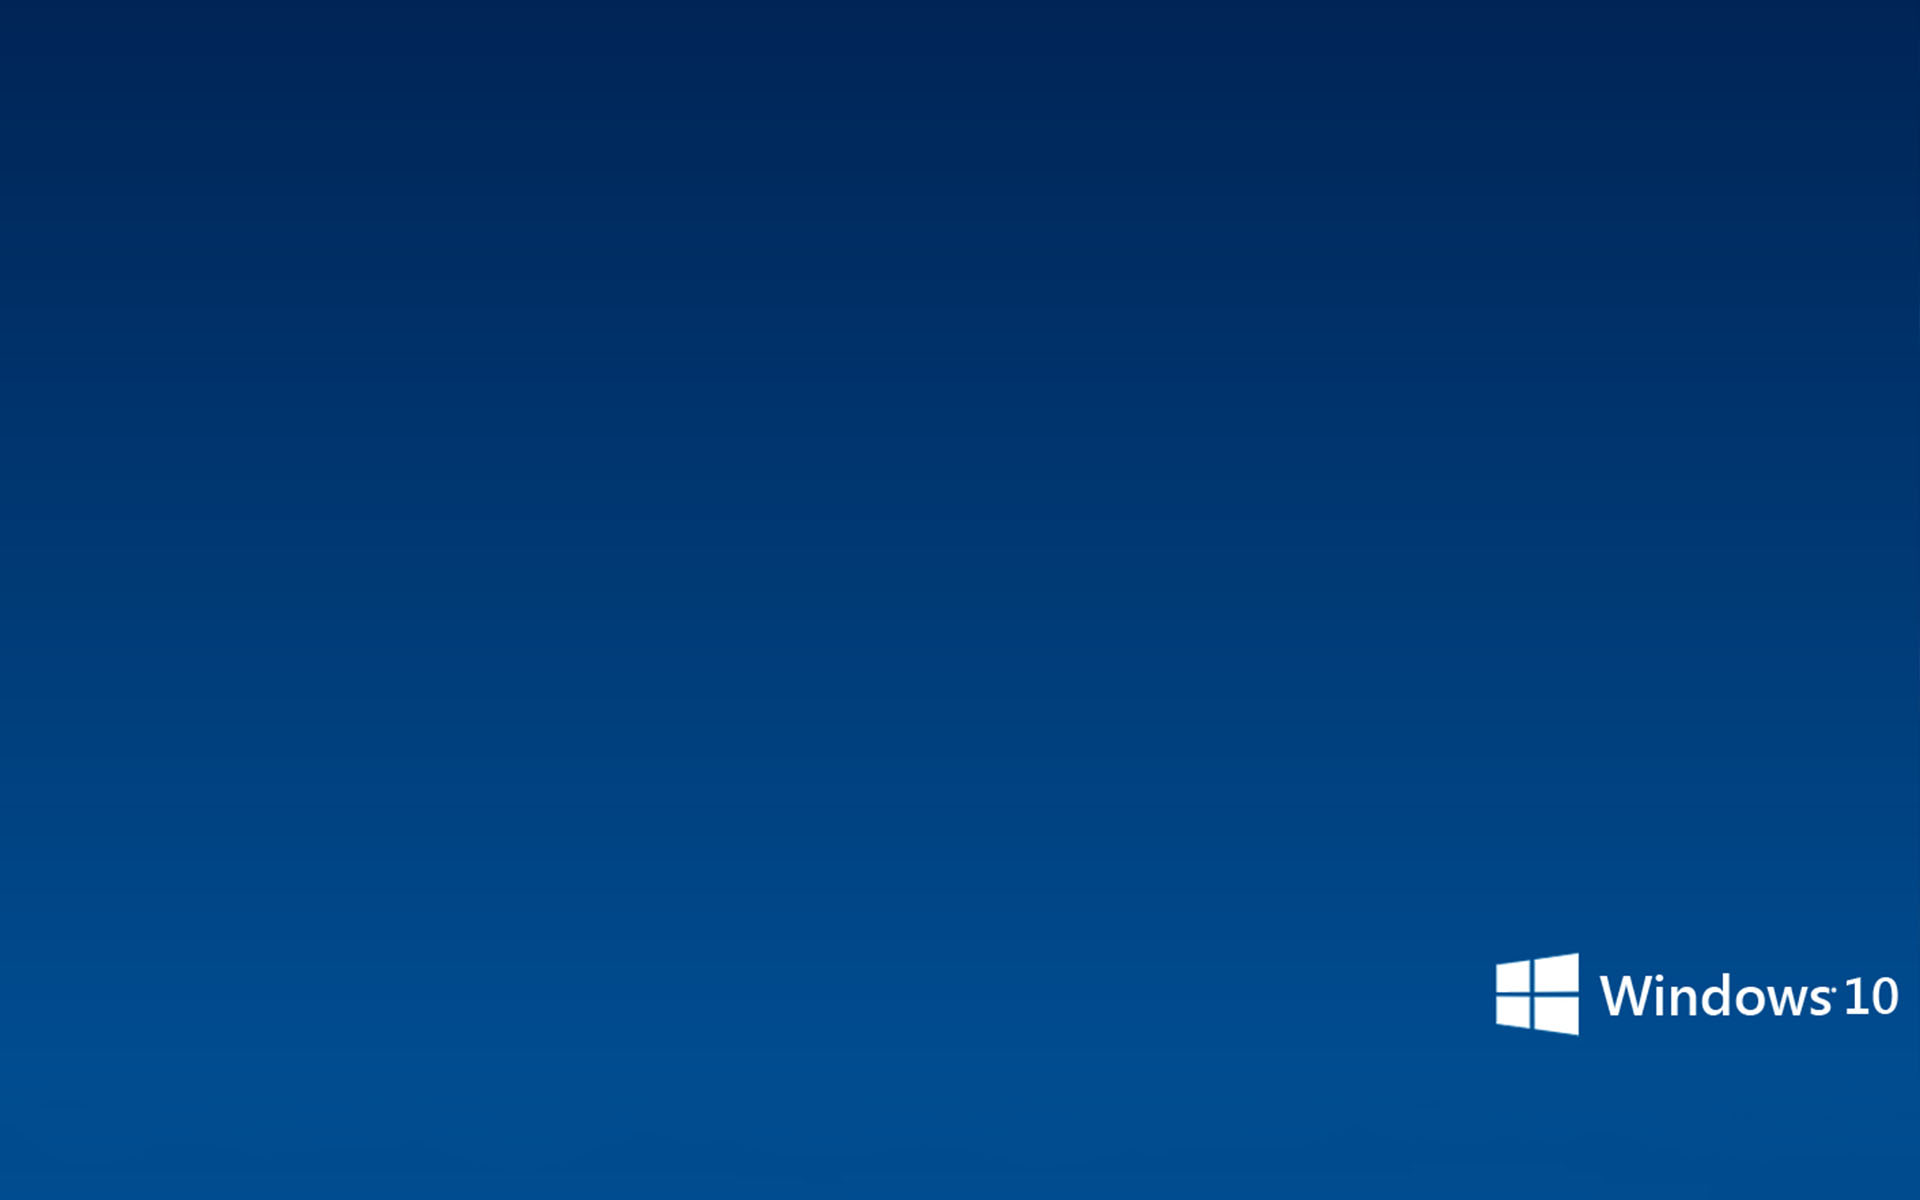 Free Download Simple Microsoft Windows 10 Wallpaper Wallpapers 19x10 For Your Desktop Mobile Tablet Explore 41 Wallpaper In Windows 10 Hd Wallpapers For Windows 10 Windows 10 Wallpaper Free Download Windows 10 Wallpaper Official